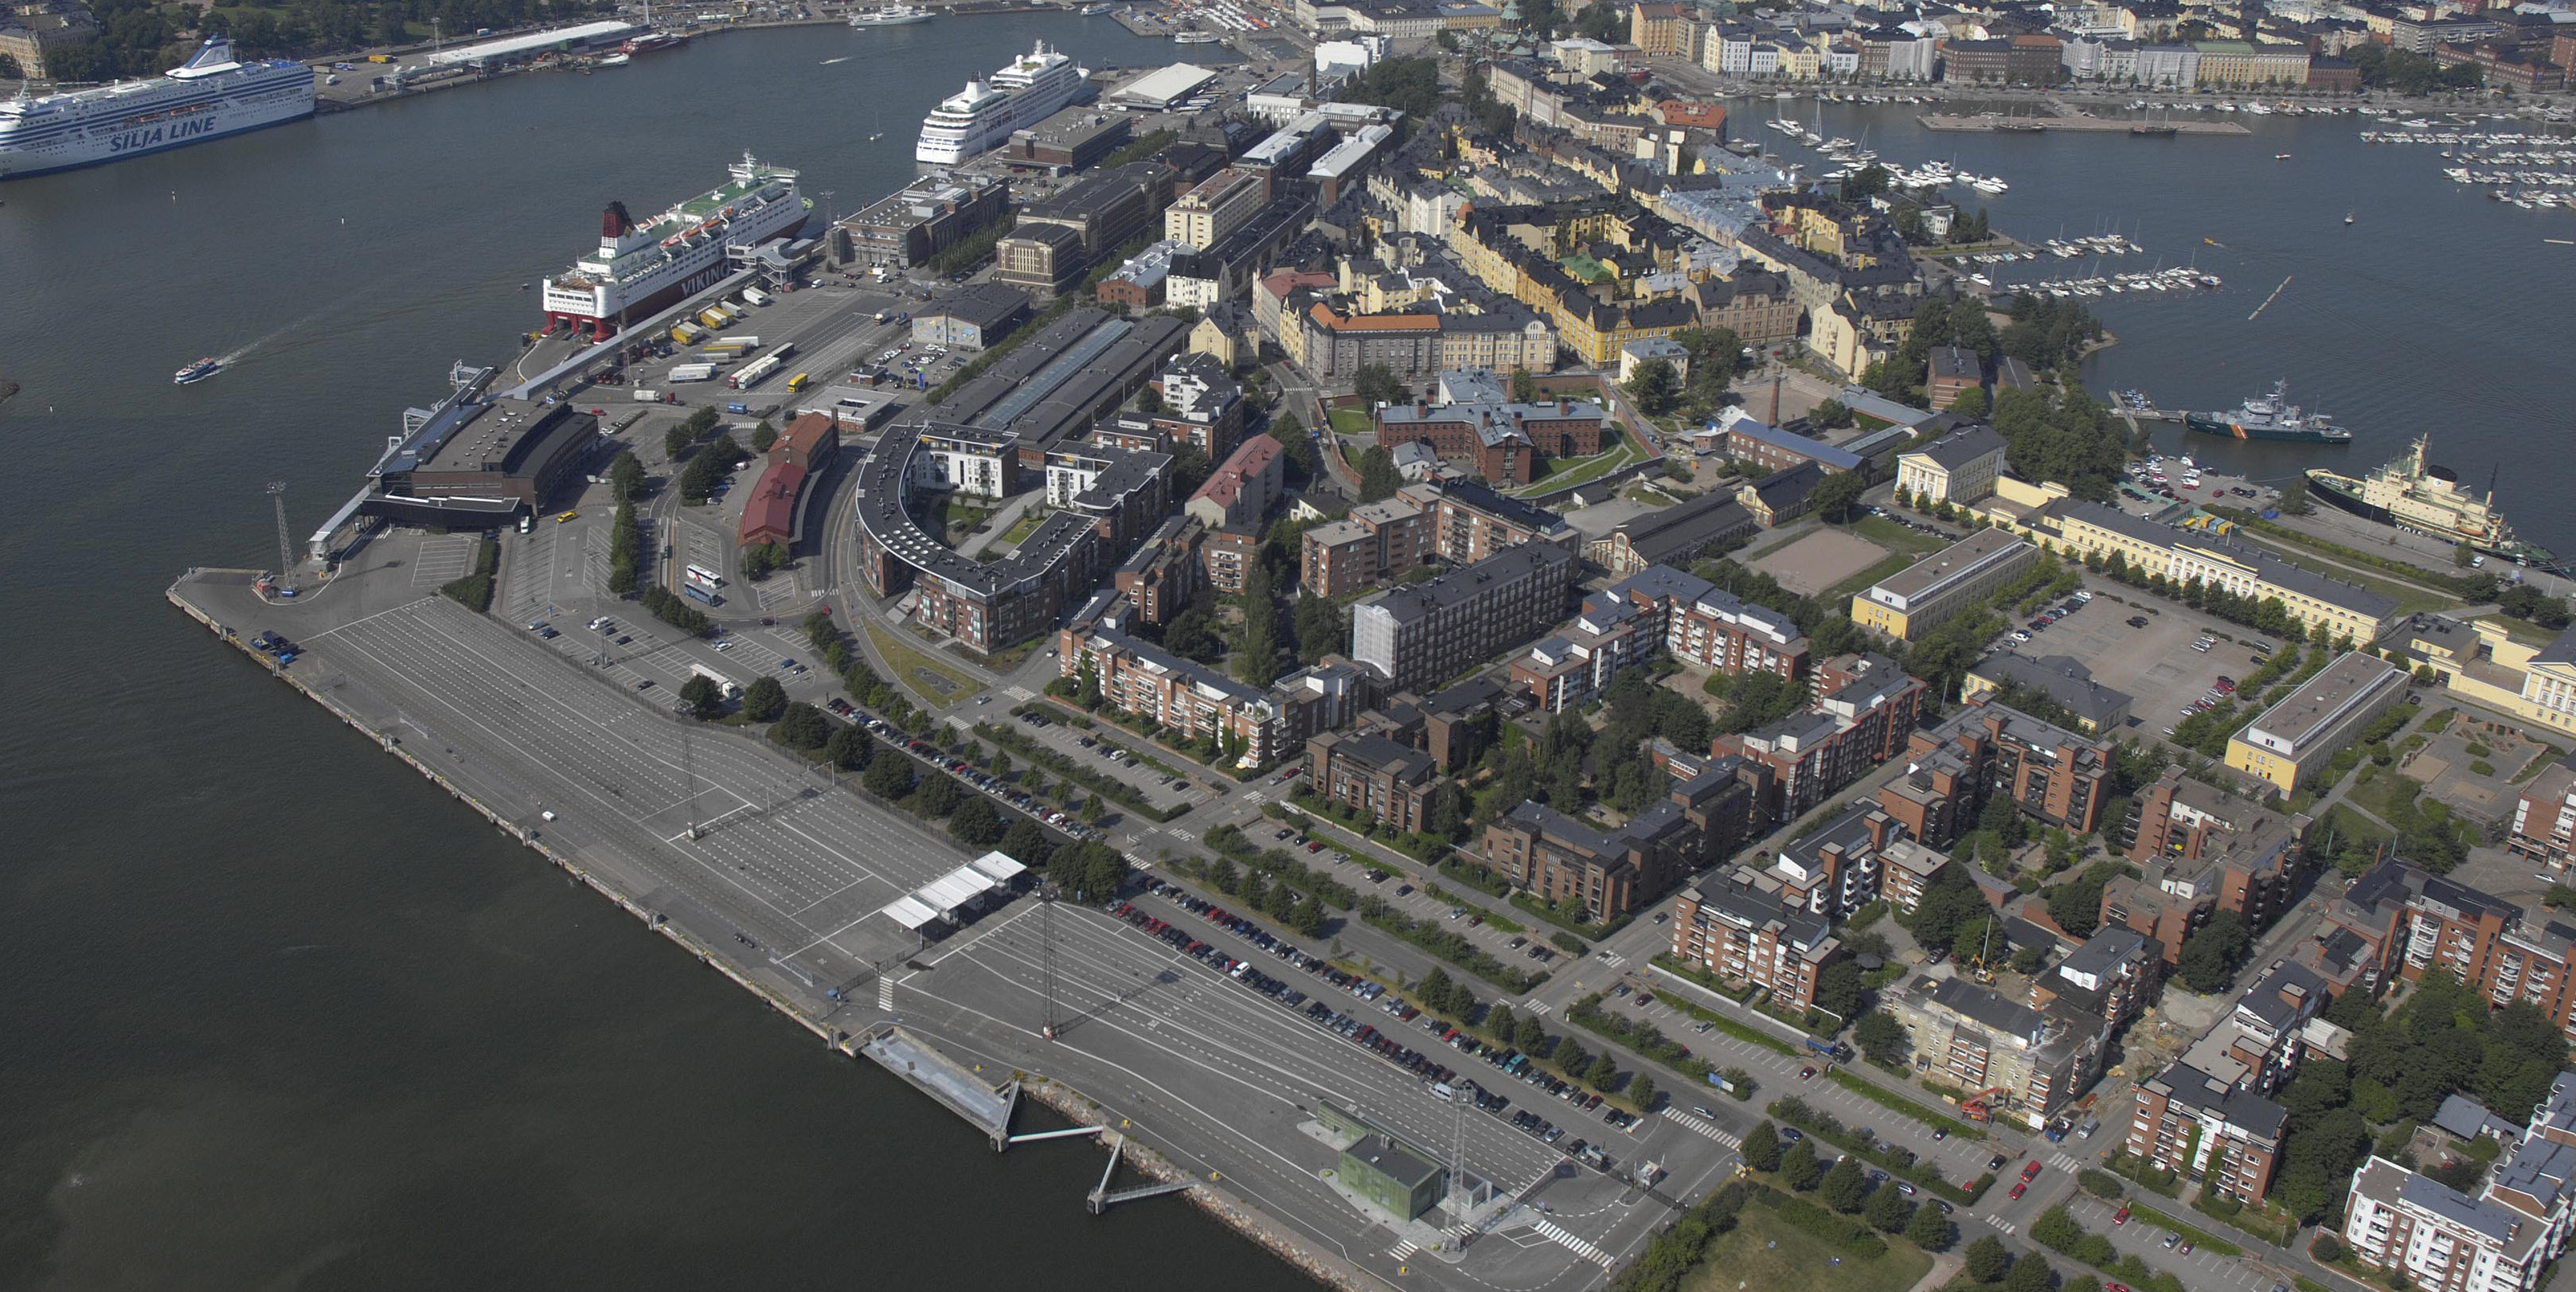 The Katajanokka Terminal serves the traffic going to Stockholm and Tallinn. The terminal has services for the passenger traffic, a restaurant as well as premises of the shipping company and customs.